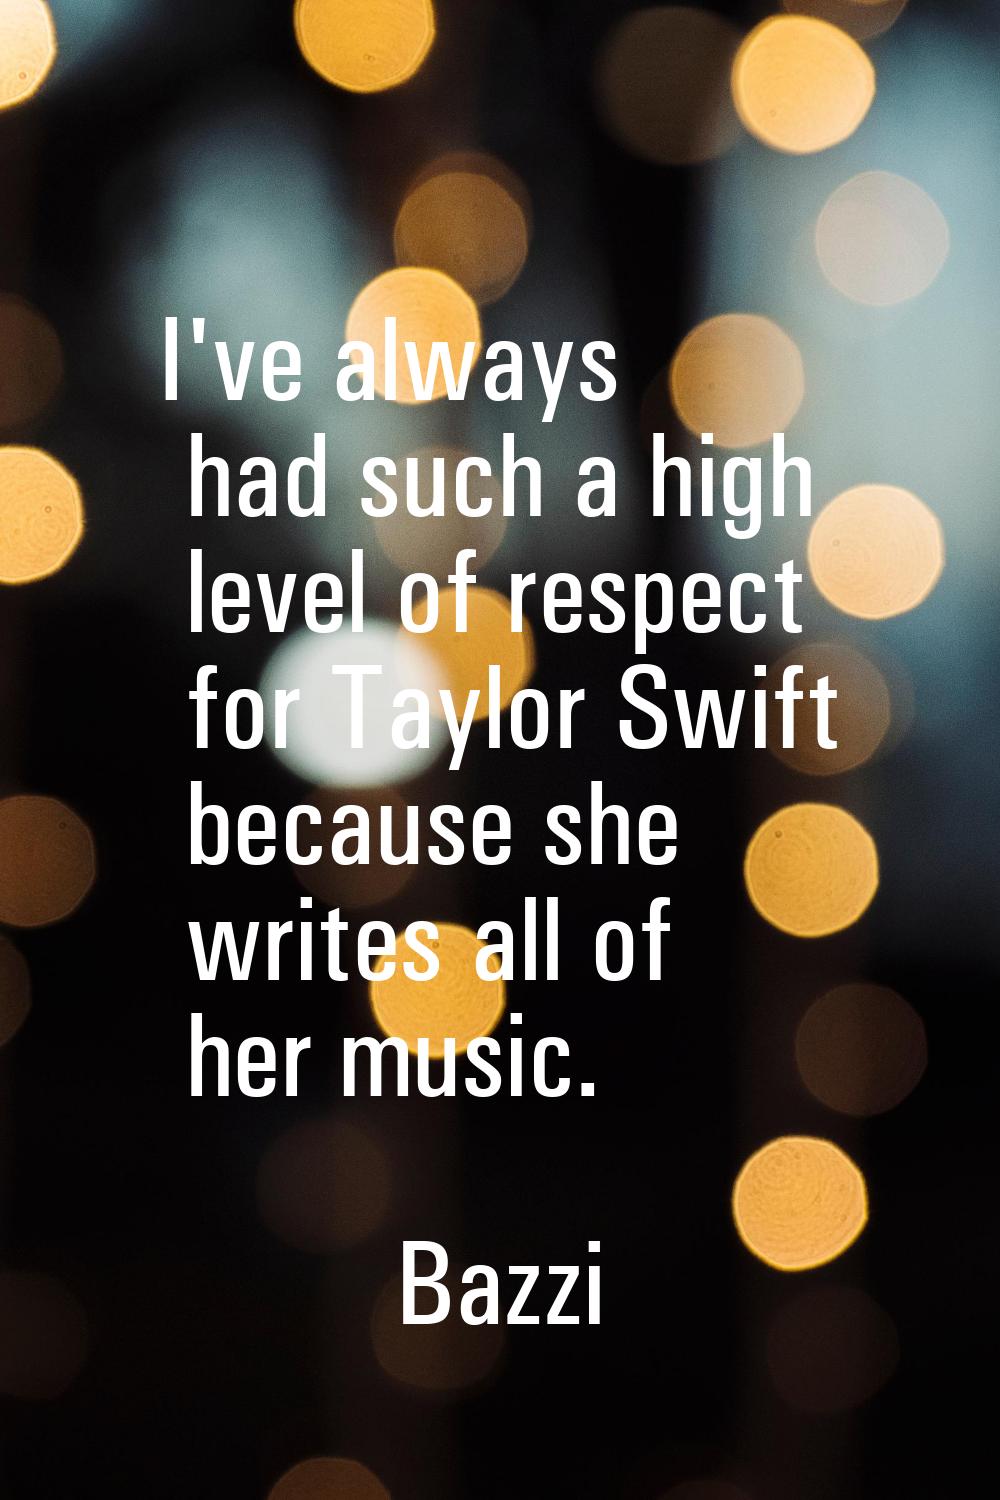 I've always had such a high level of respect for Taylor Swift because she writes all of her music.